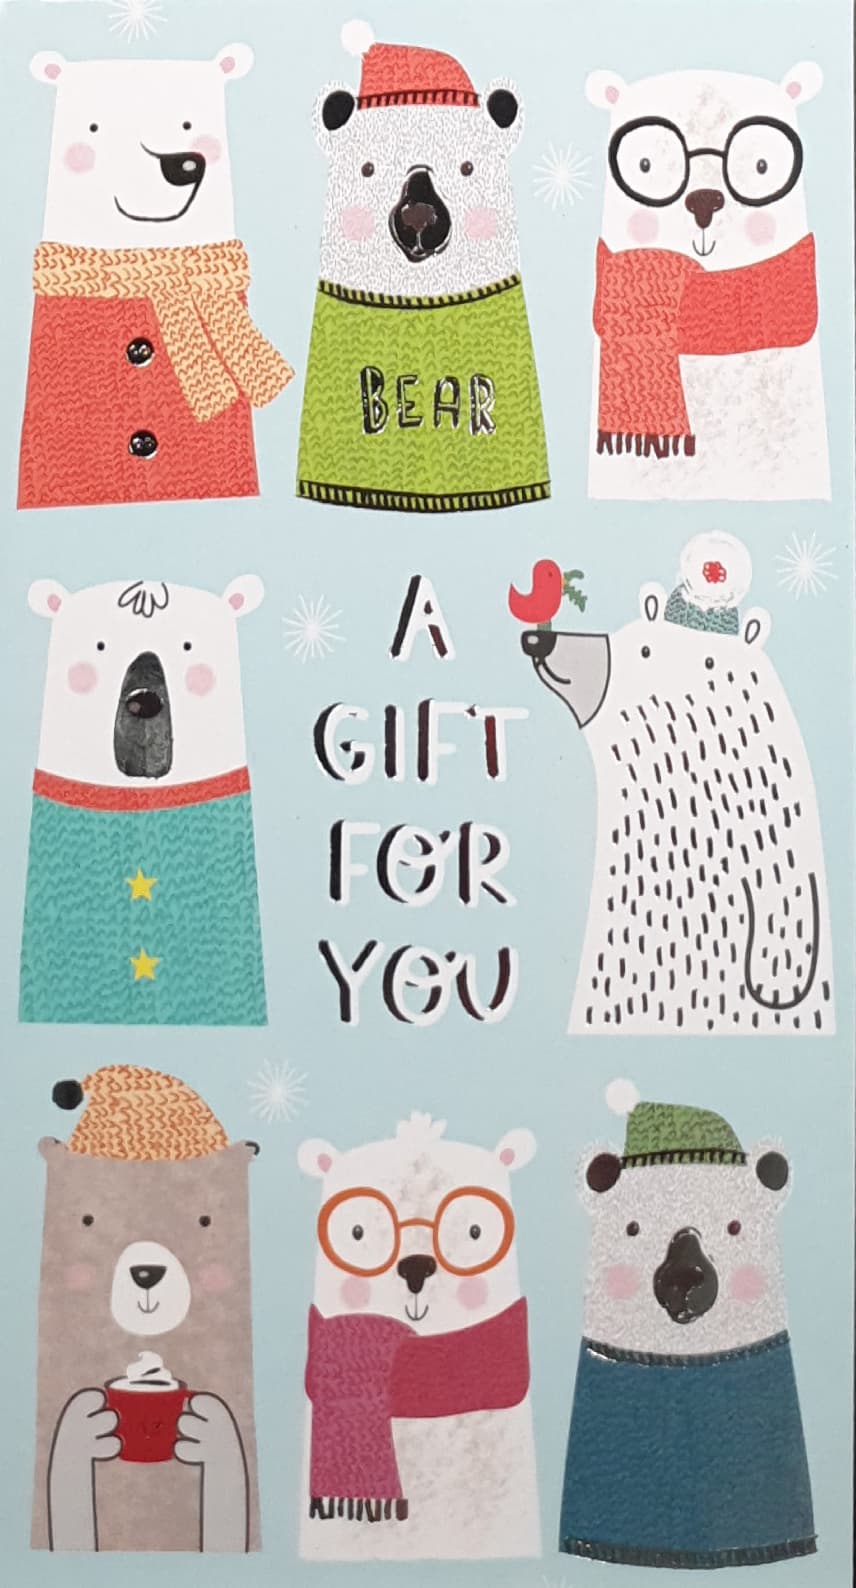 Money Wallet Christmas Card - A gift For You / Cute Christmas Bears Wearing Jumpers